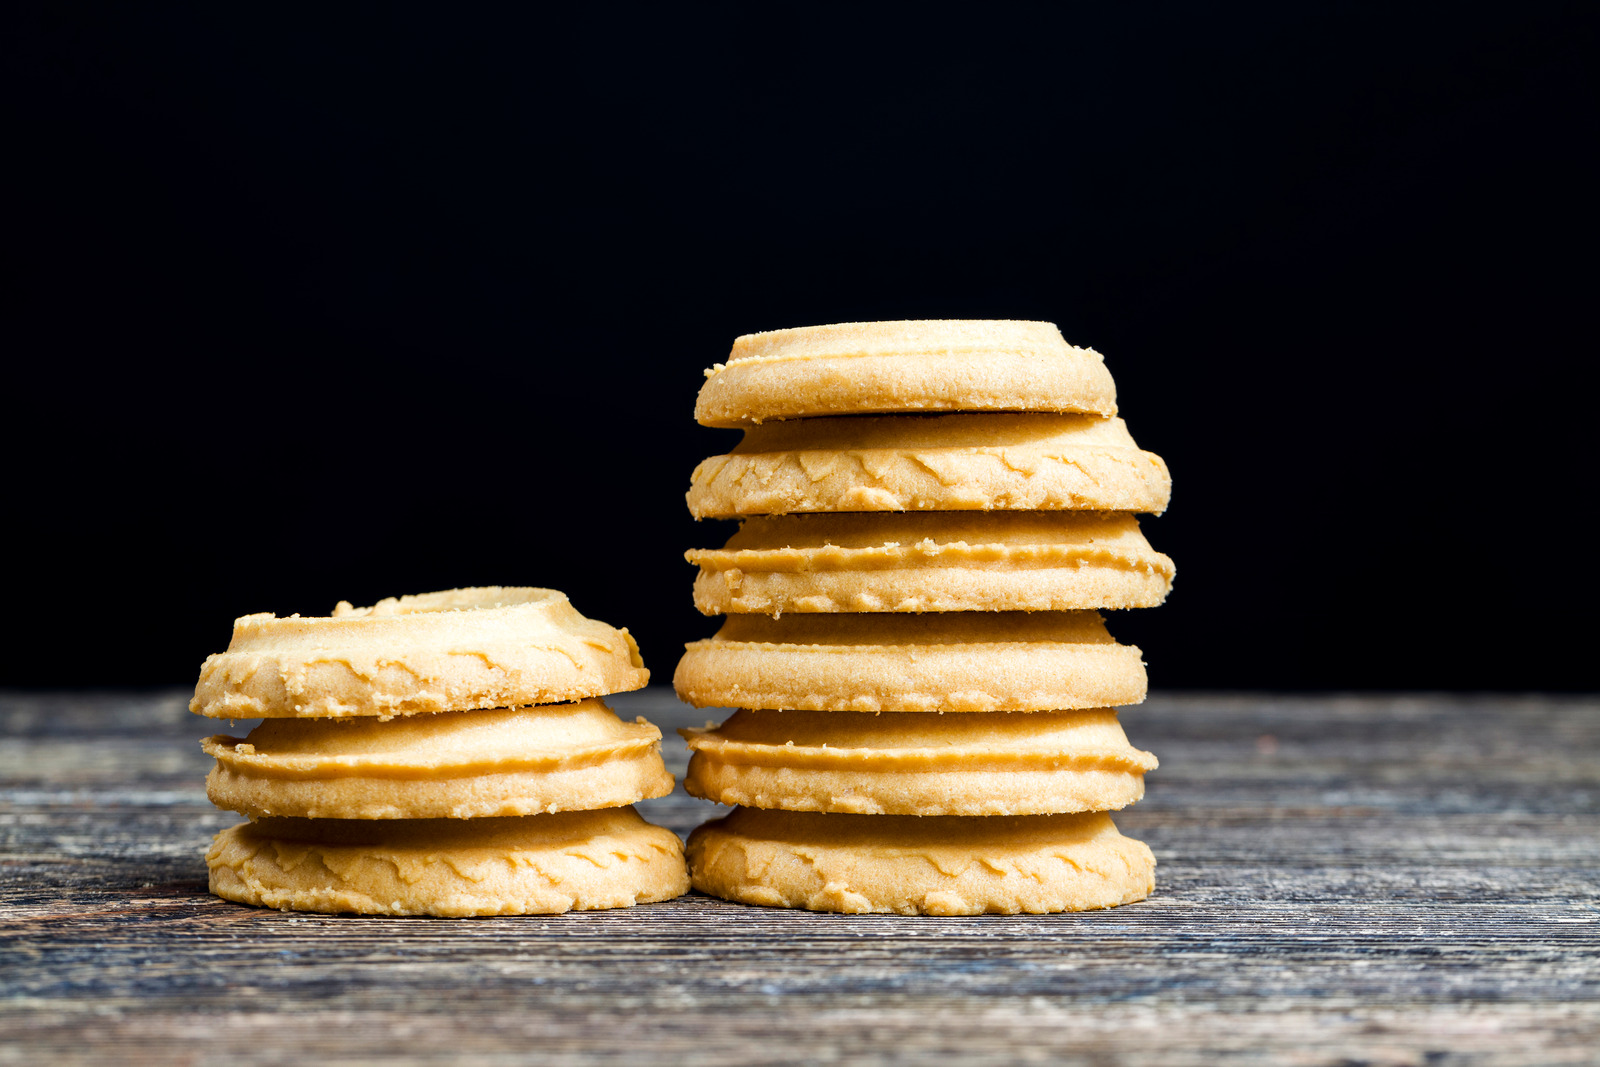 A stack of golden-brown crumbl cookies on a rustic wooden surface against a dark background